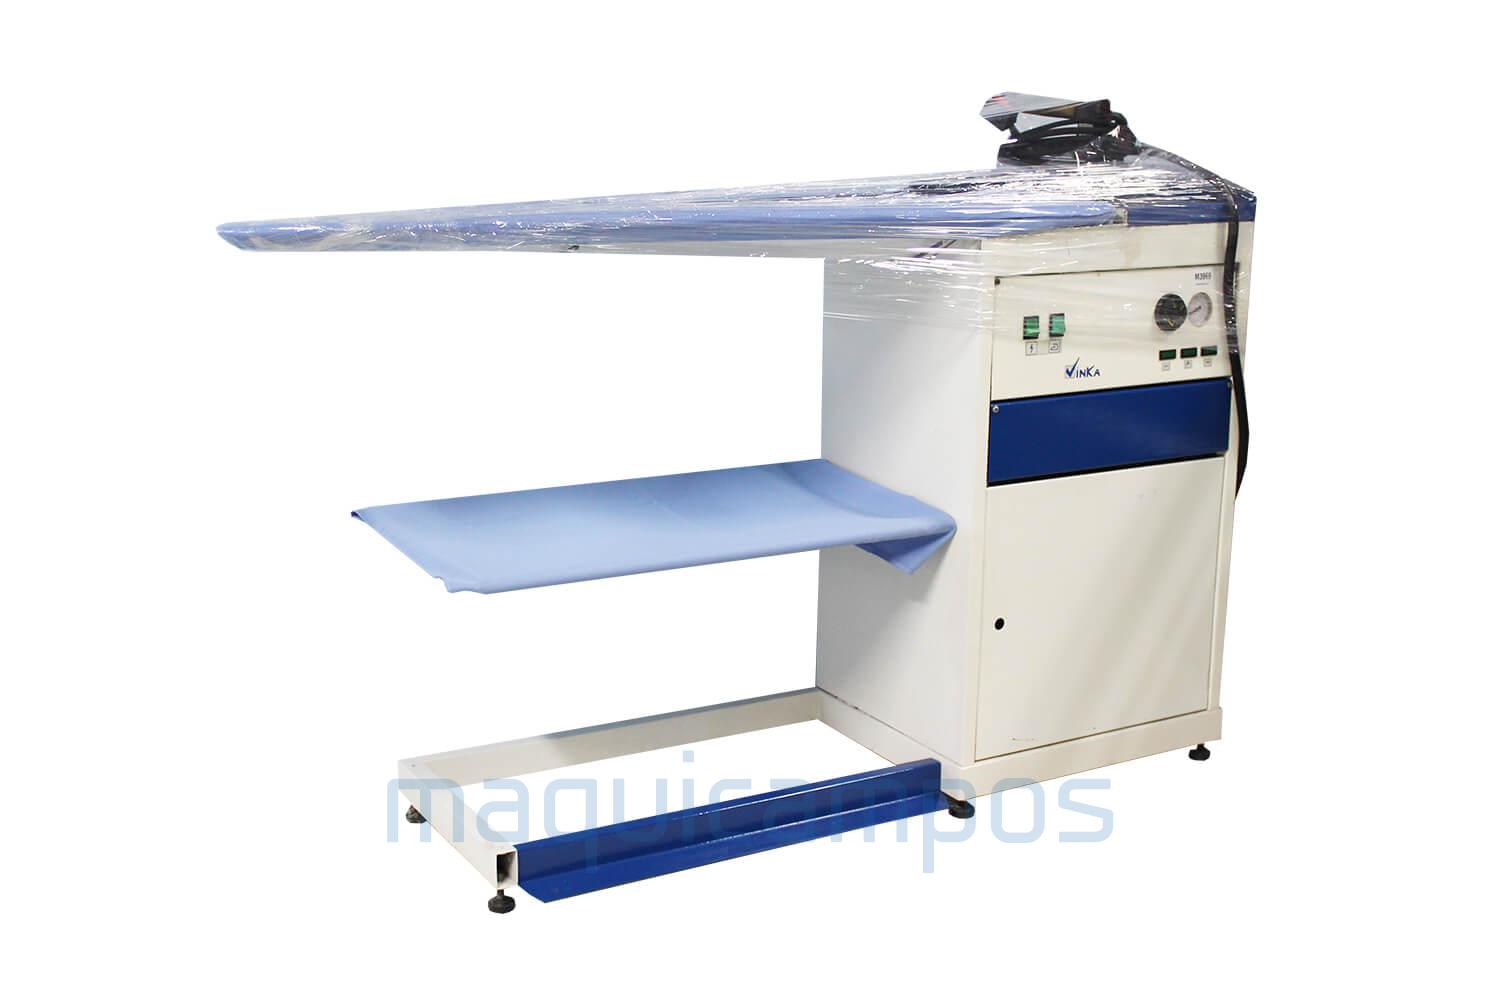 Vinka Ironing Table with Suction and Iron